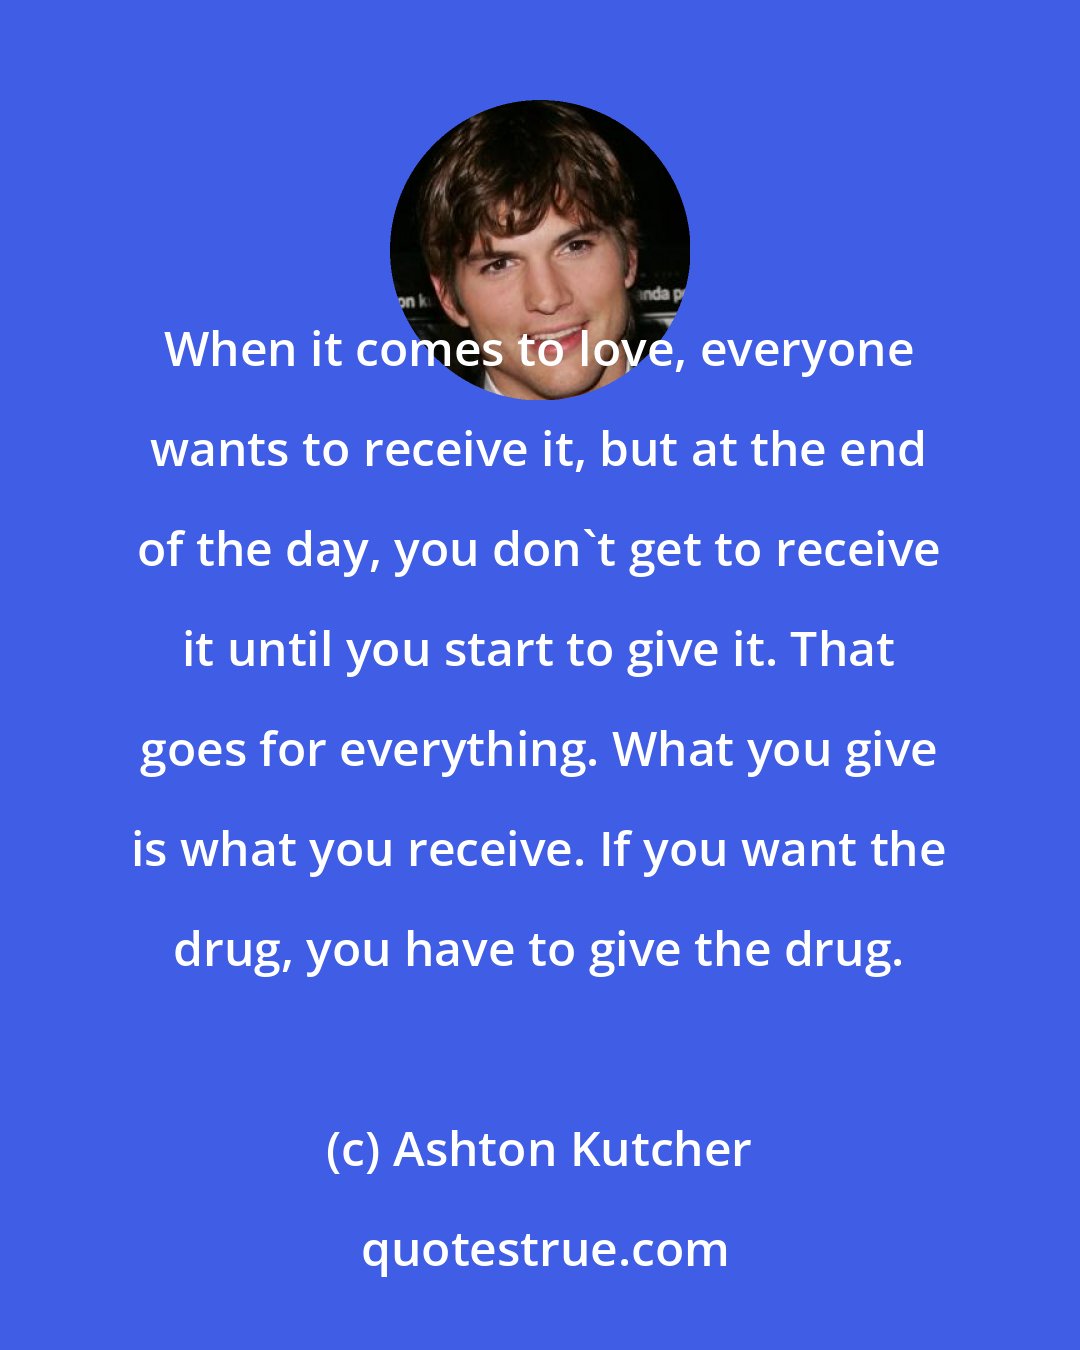 Ashton Kutcher: When it comes to love, everyone wants to receive it, but at the end of the day, you don't get to receive it until you start to give it. That goes for everything. What you give is what you receive. If you want the drug, you have to give the drug.